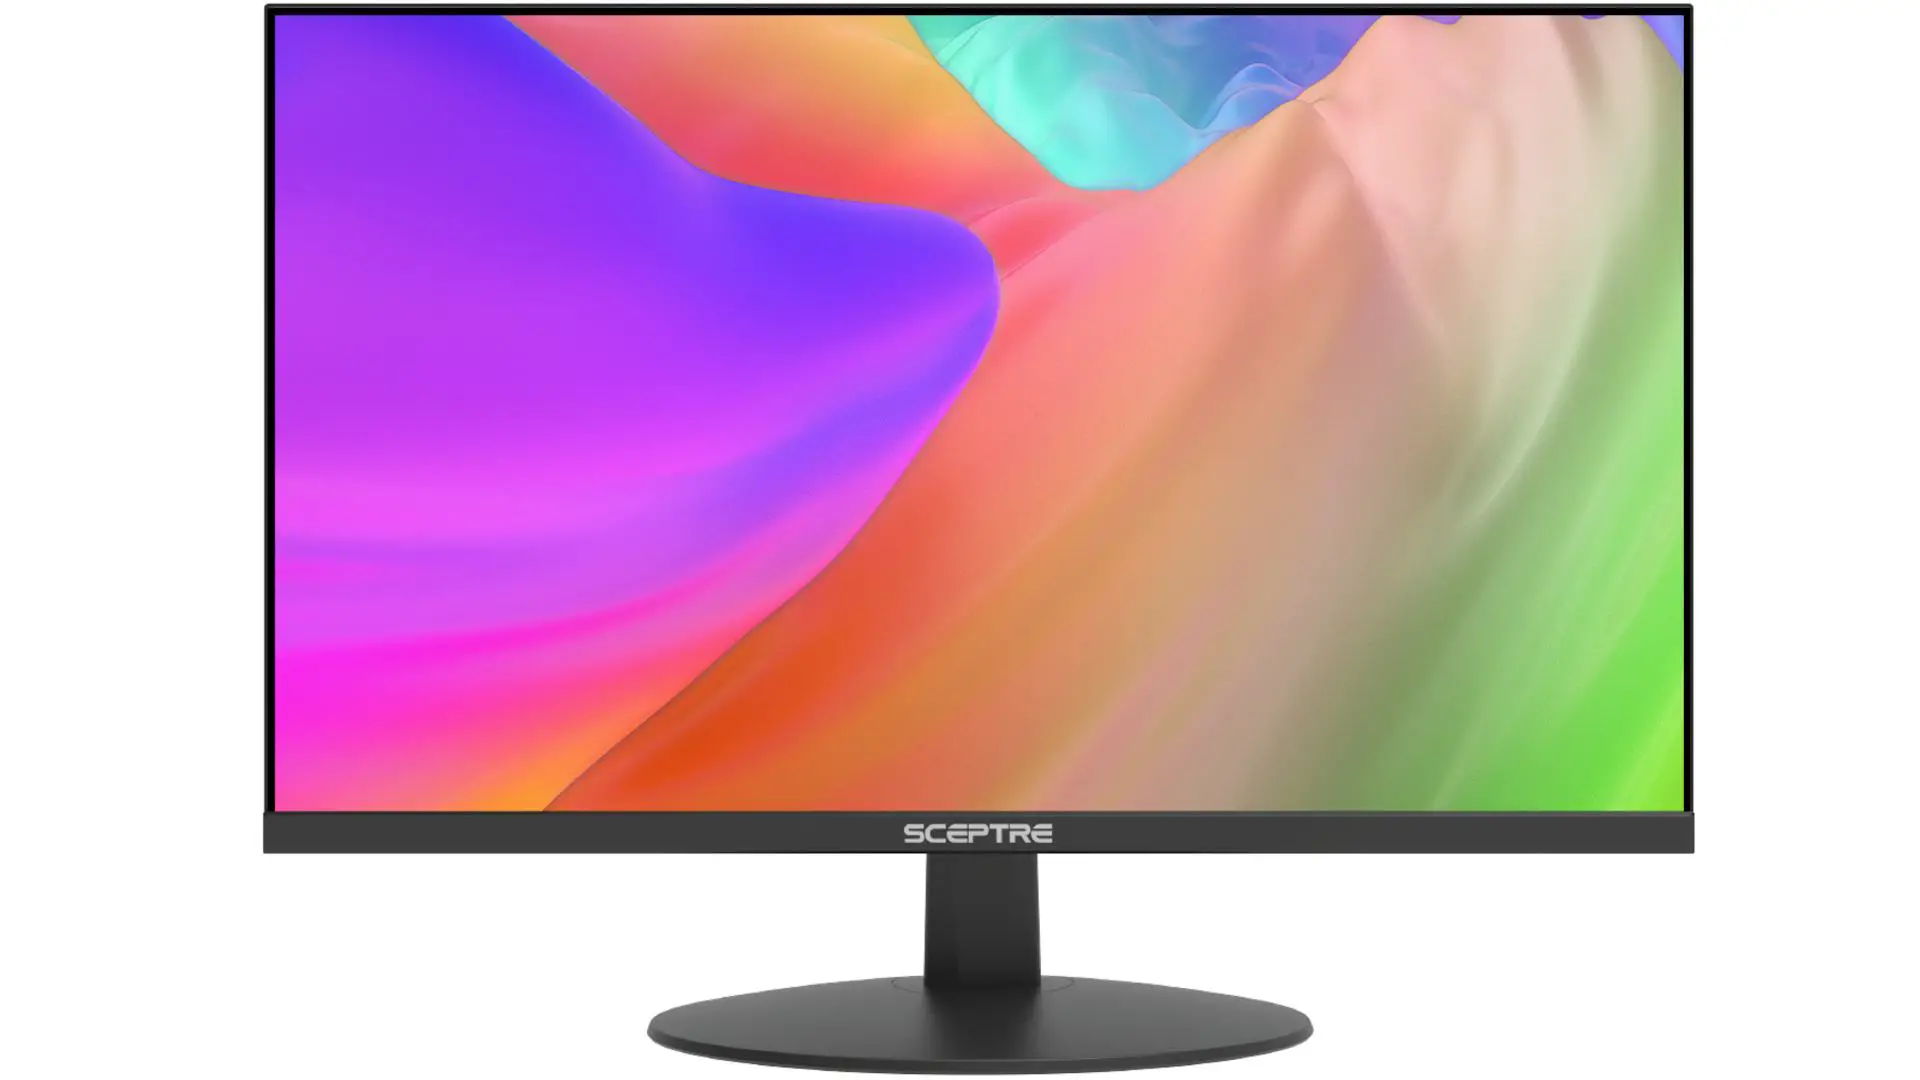 You are currently viewing Sceptre 24-inch E249W-FPT Monitor Review